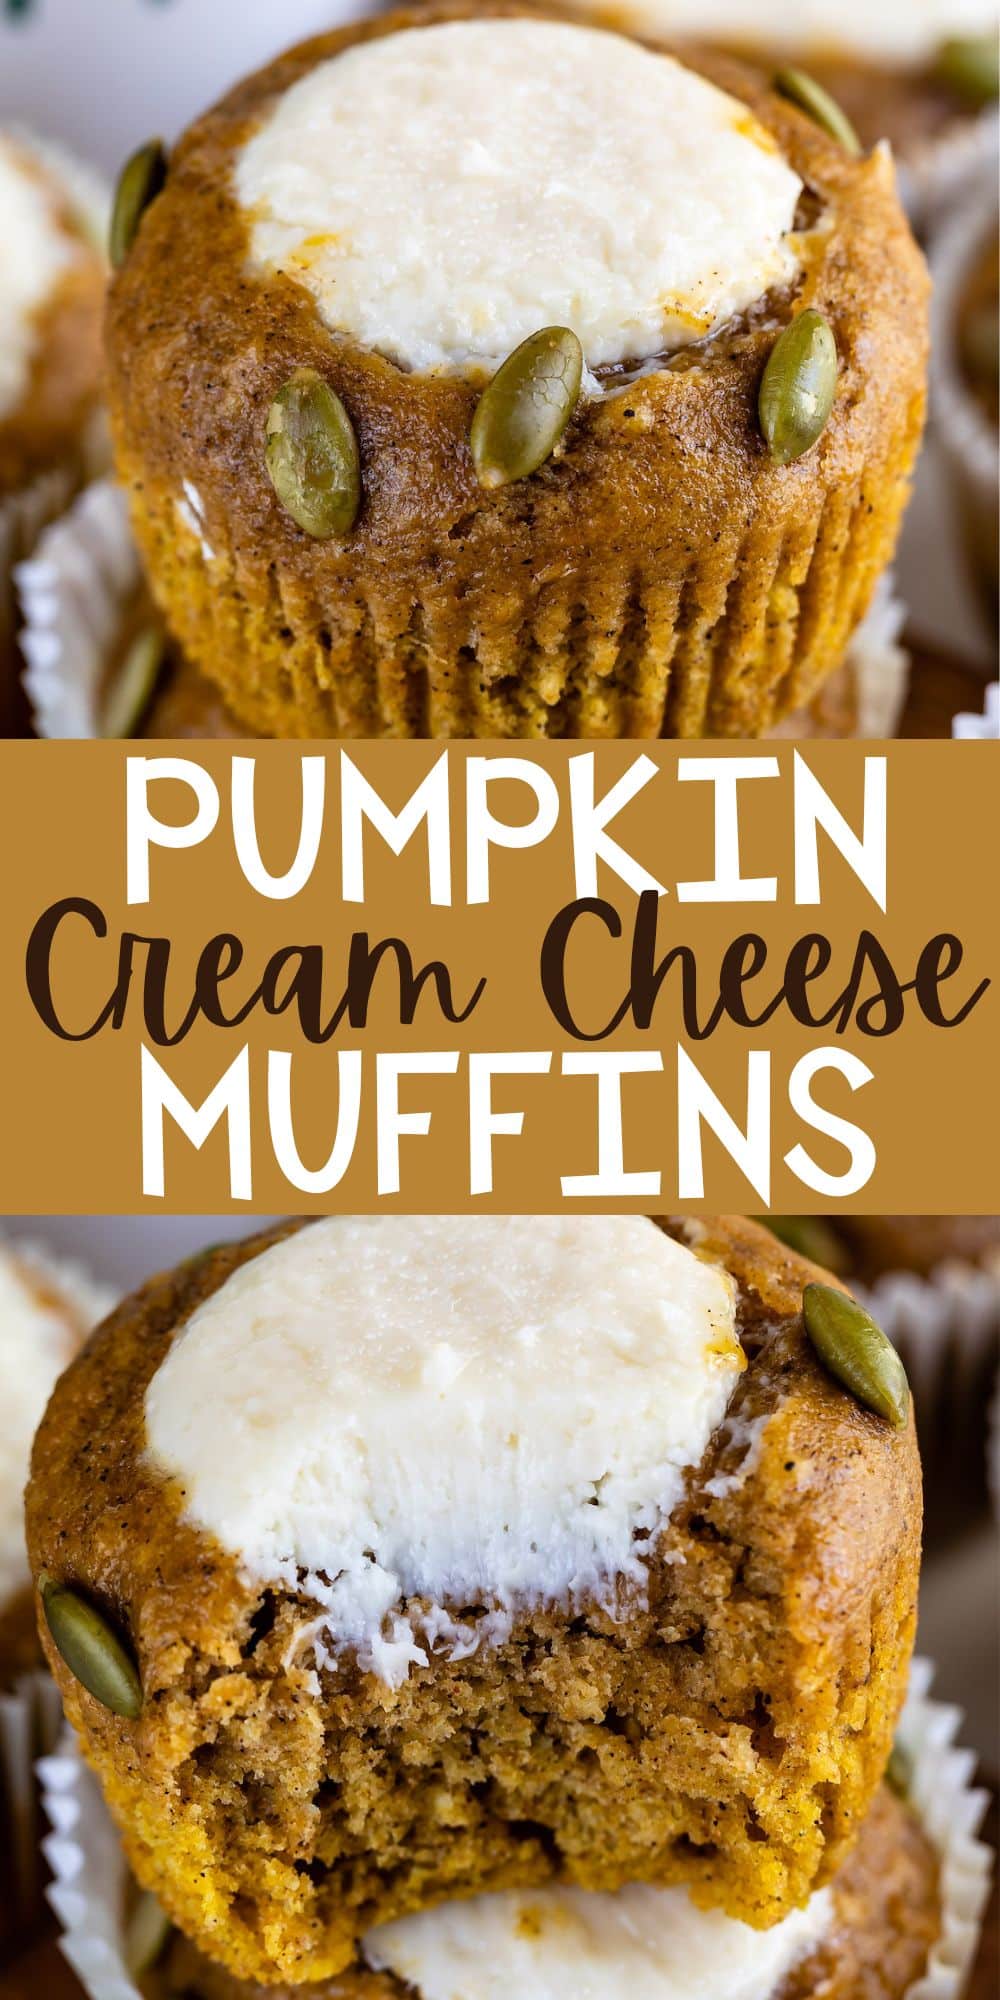 two photos of muffins with seeds and cream cheese in the center and words on the image.